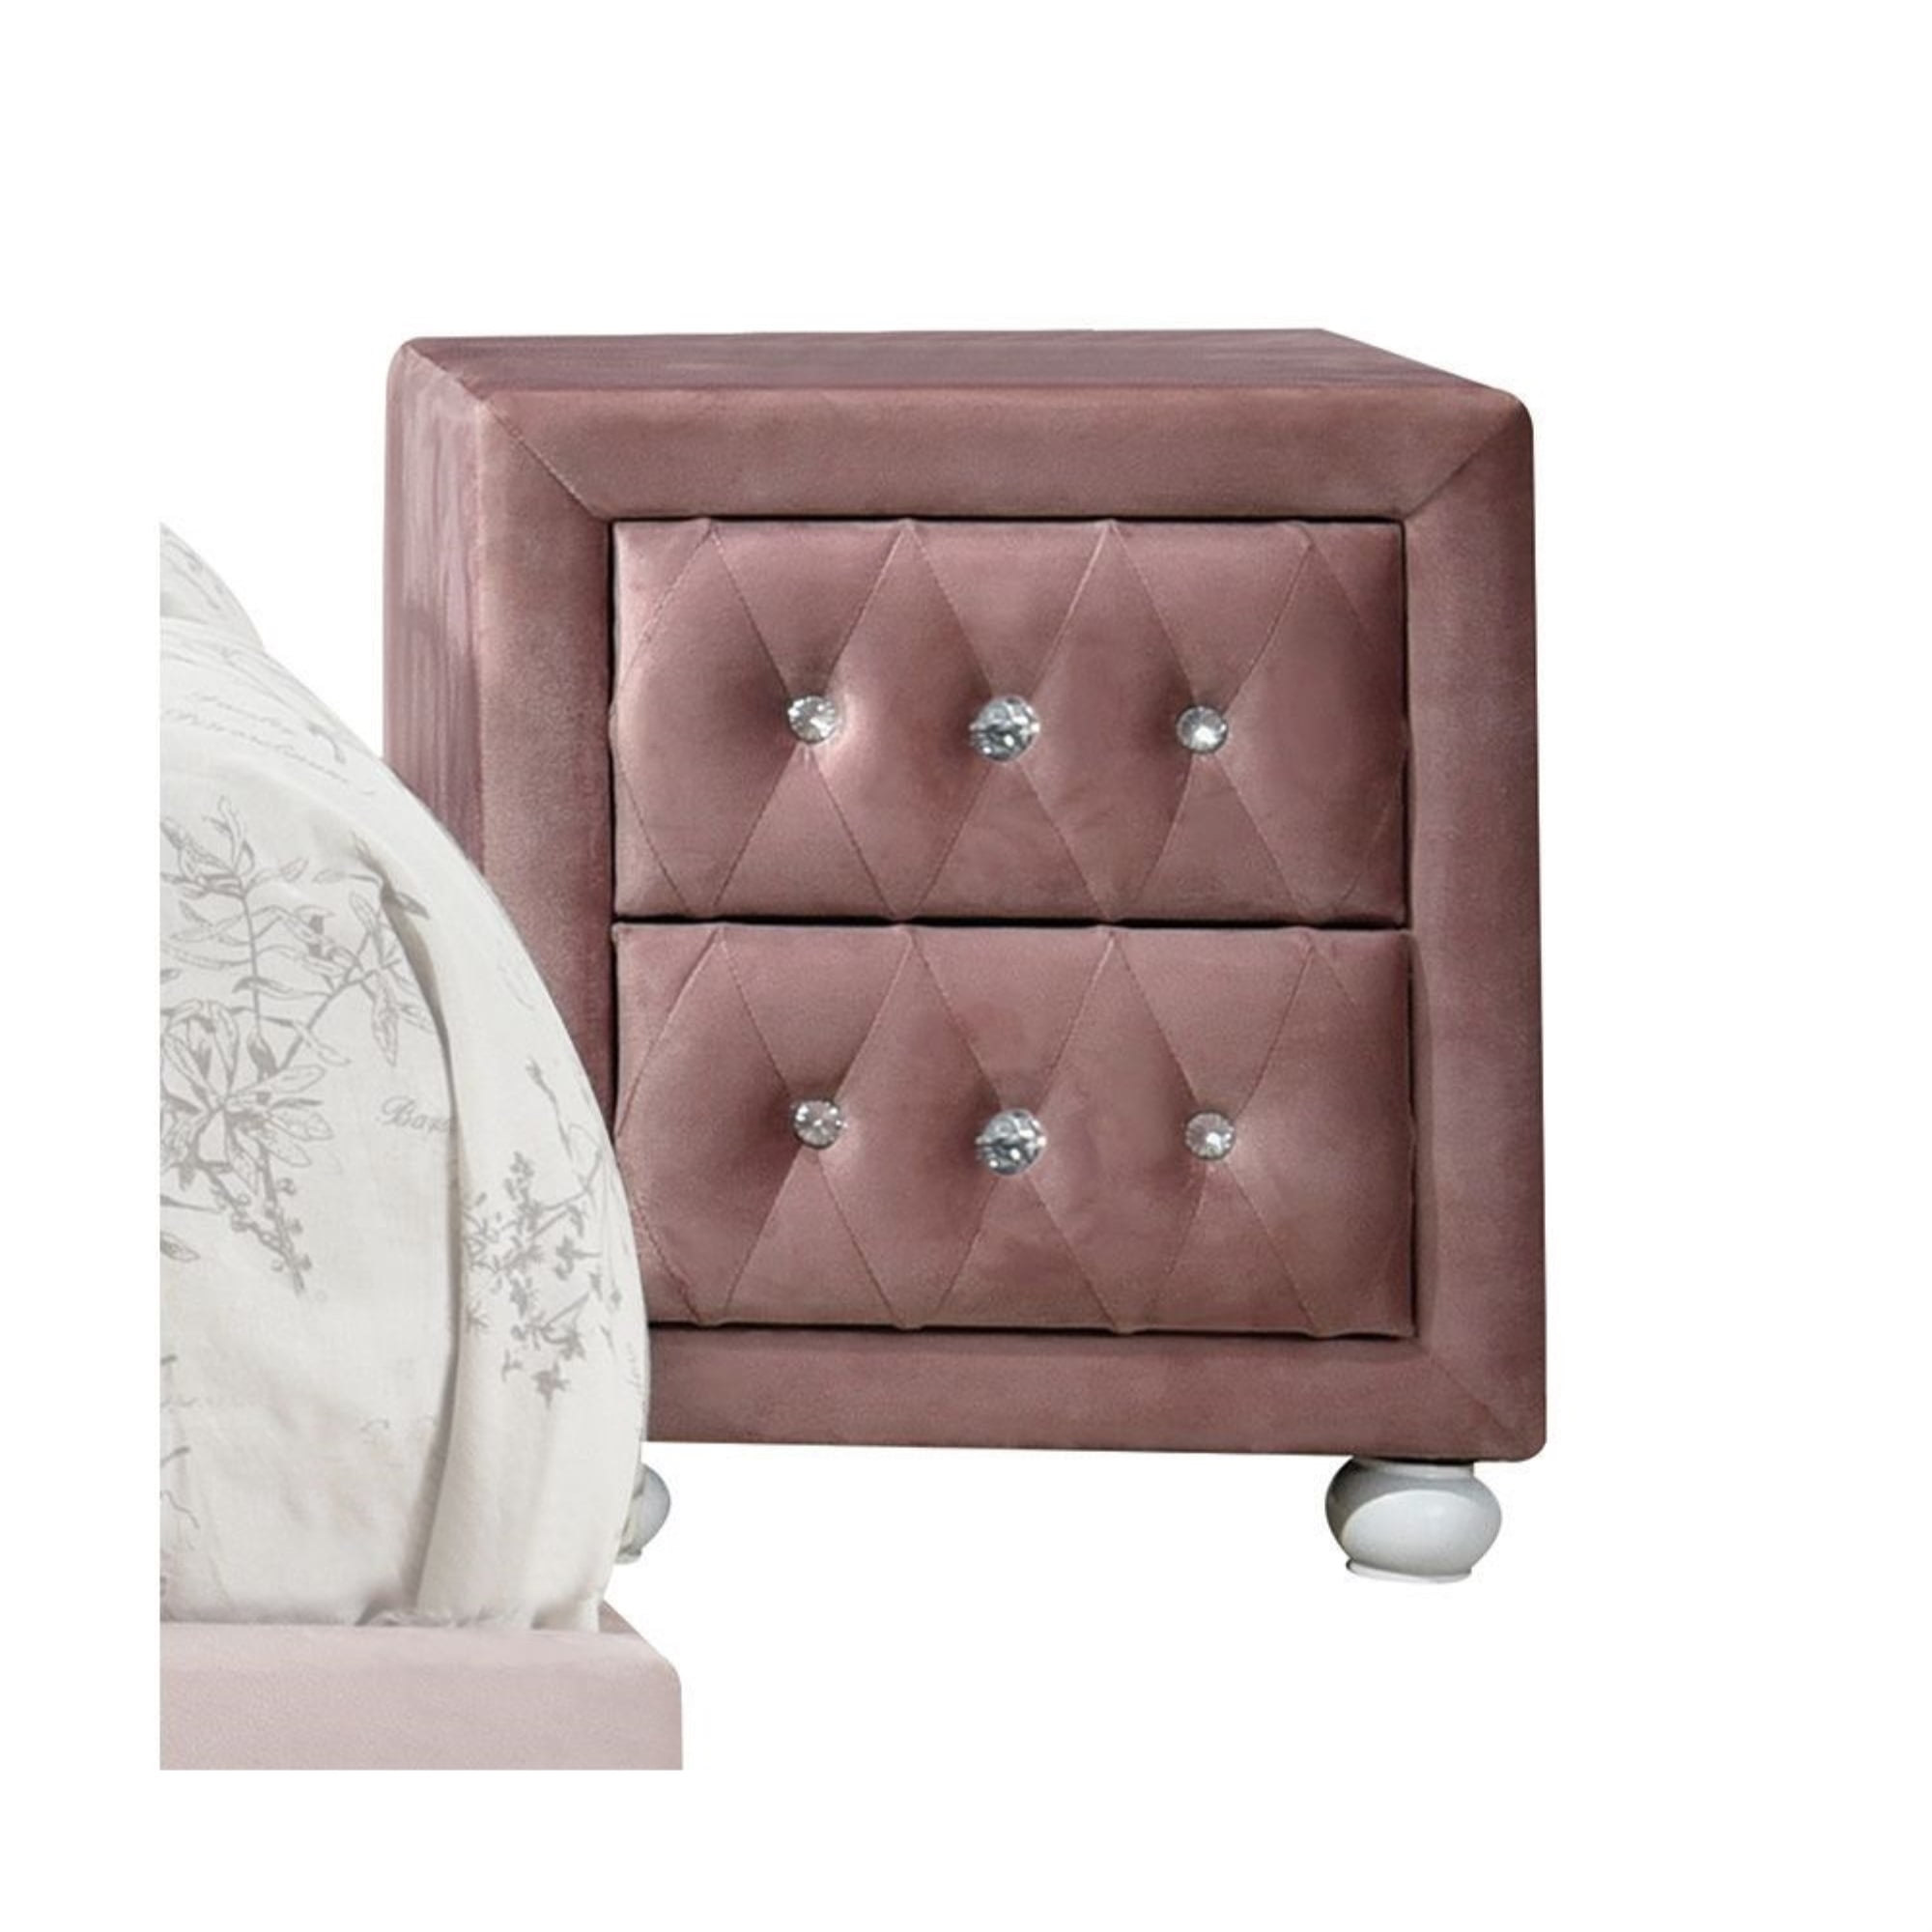 Picture of Acme Furniture 30823 17 x 17 x 17 in. Reggie Nightstand, Pink Fabric